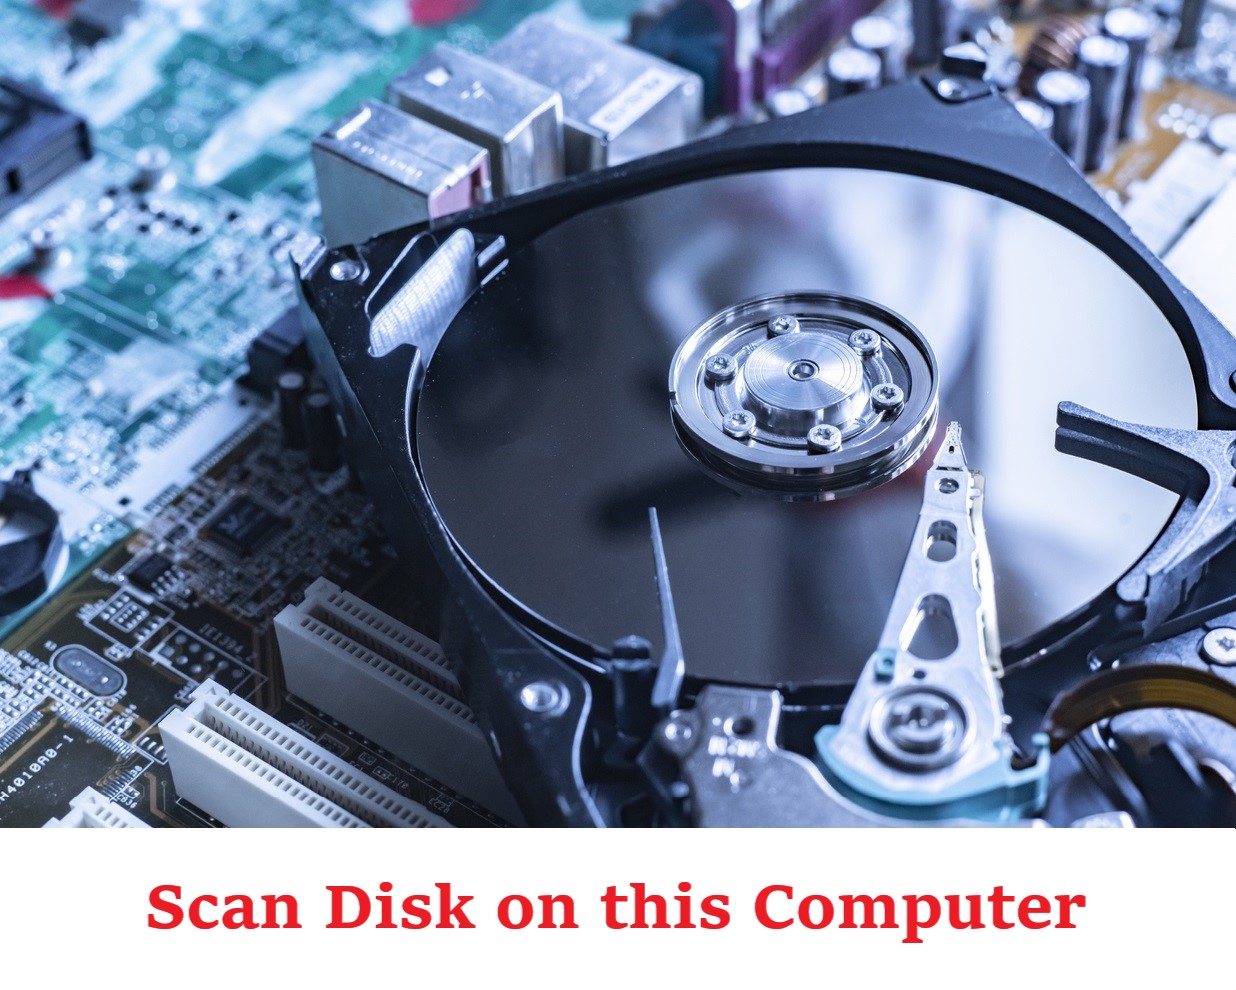 Scan Disk on this Computer